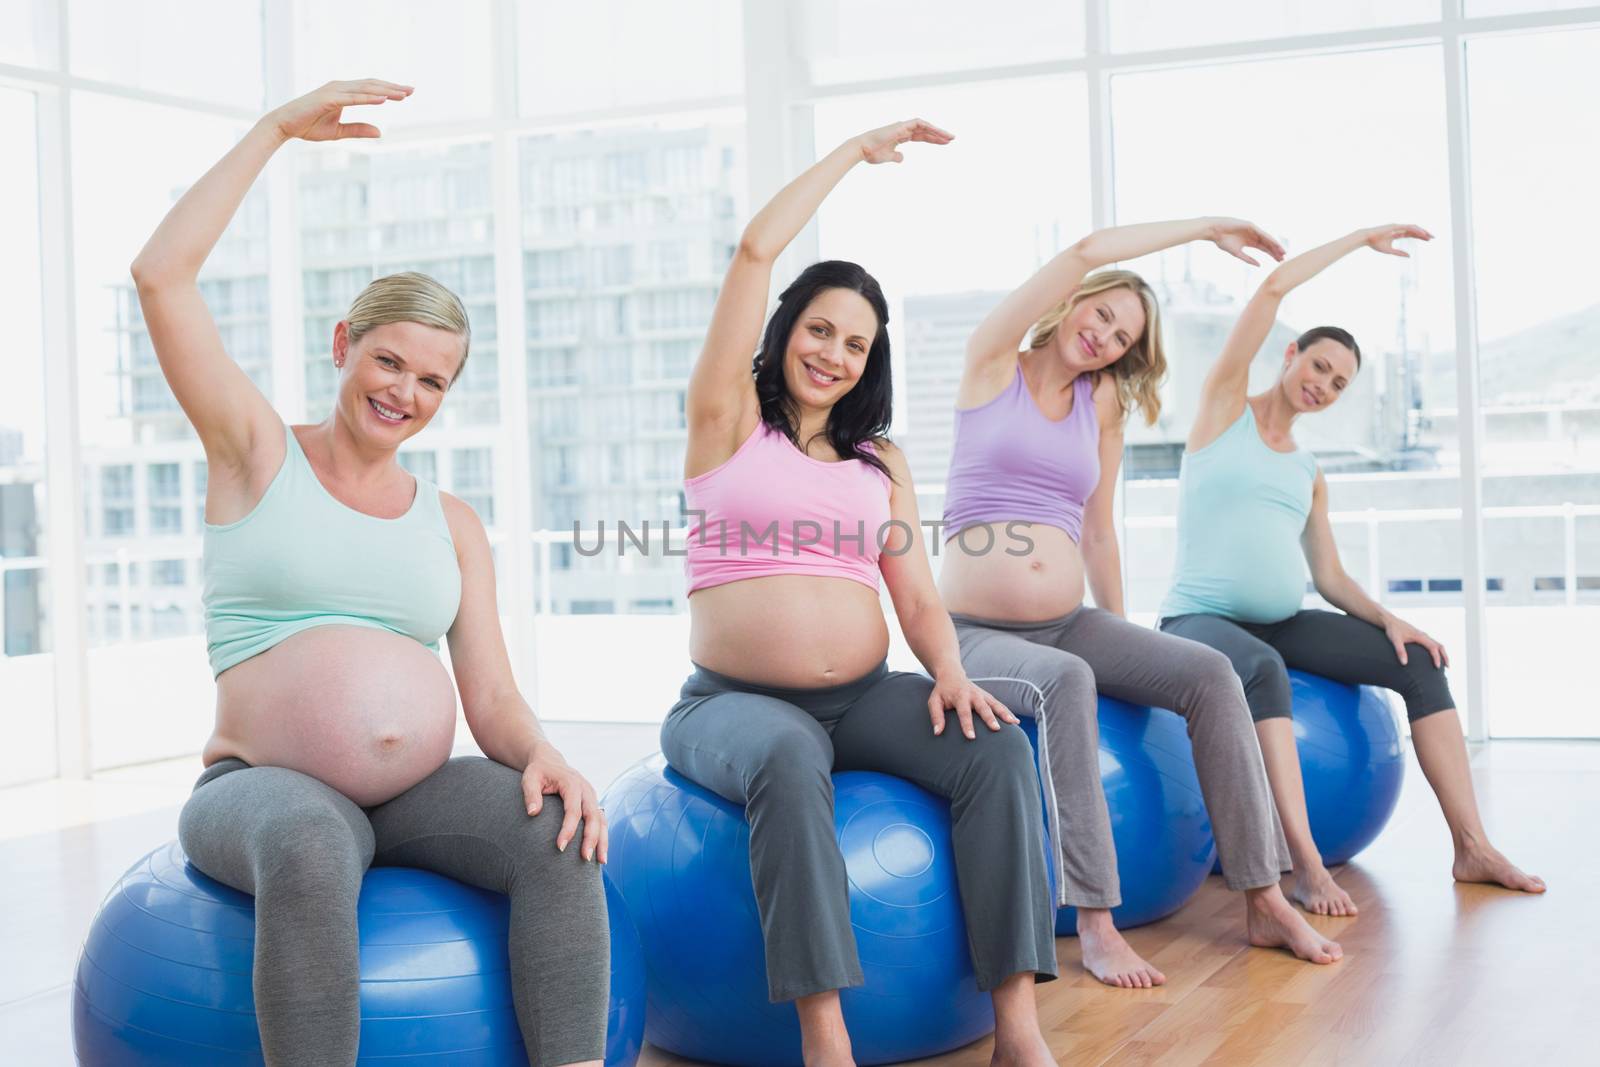 Pregnant women sitting on exercise balls stretching arms in a fitness studio